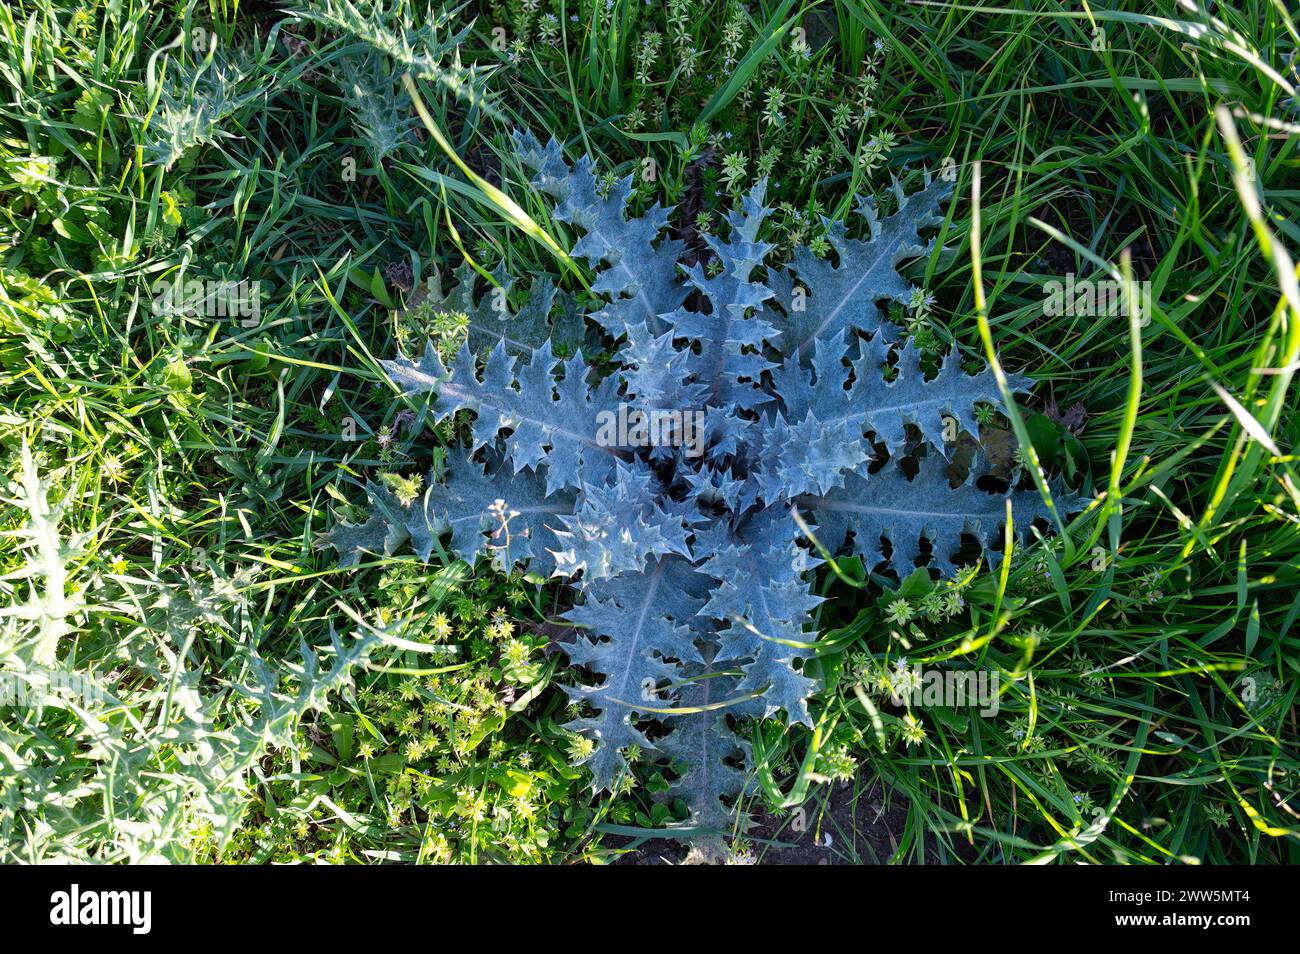 Musk thistle, Carduus nutans, growing in the green grass in spring. Stock Photo